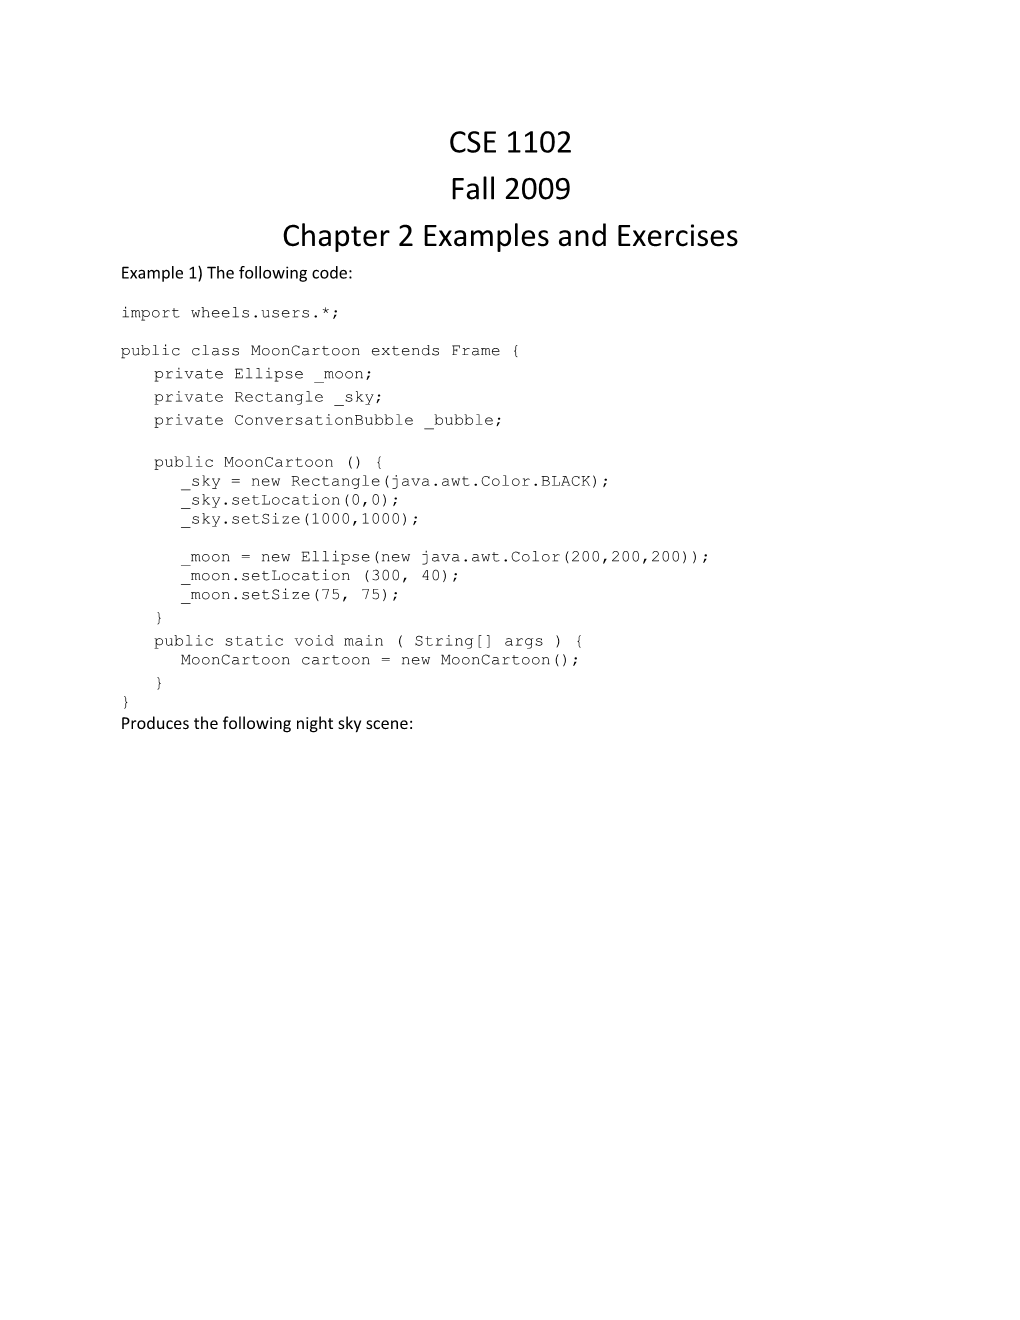 Chapter 2 Examples and Exercises